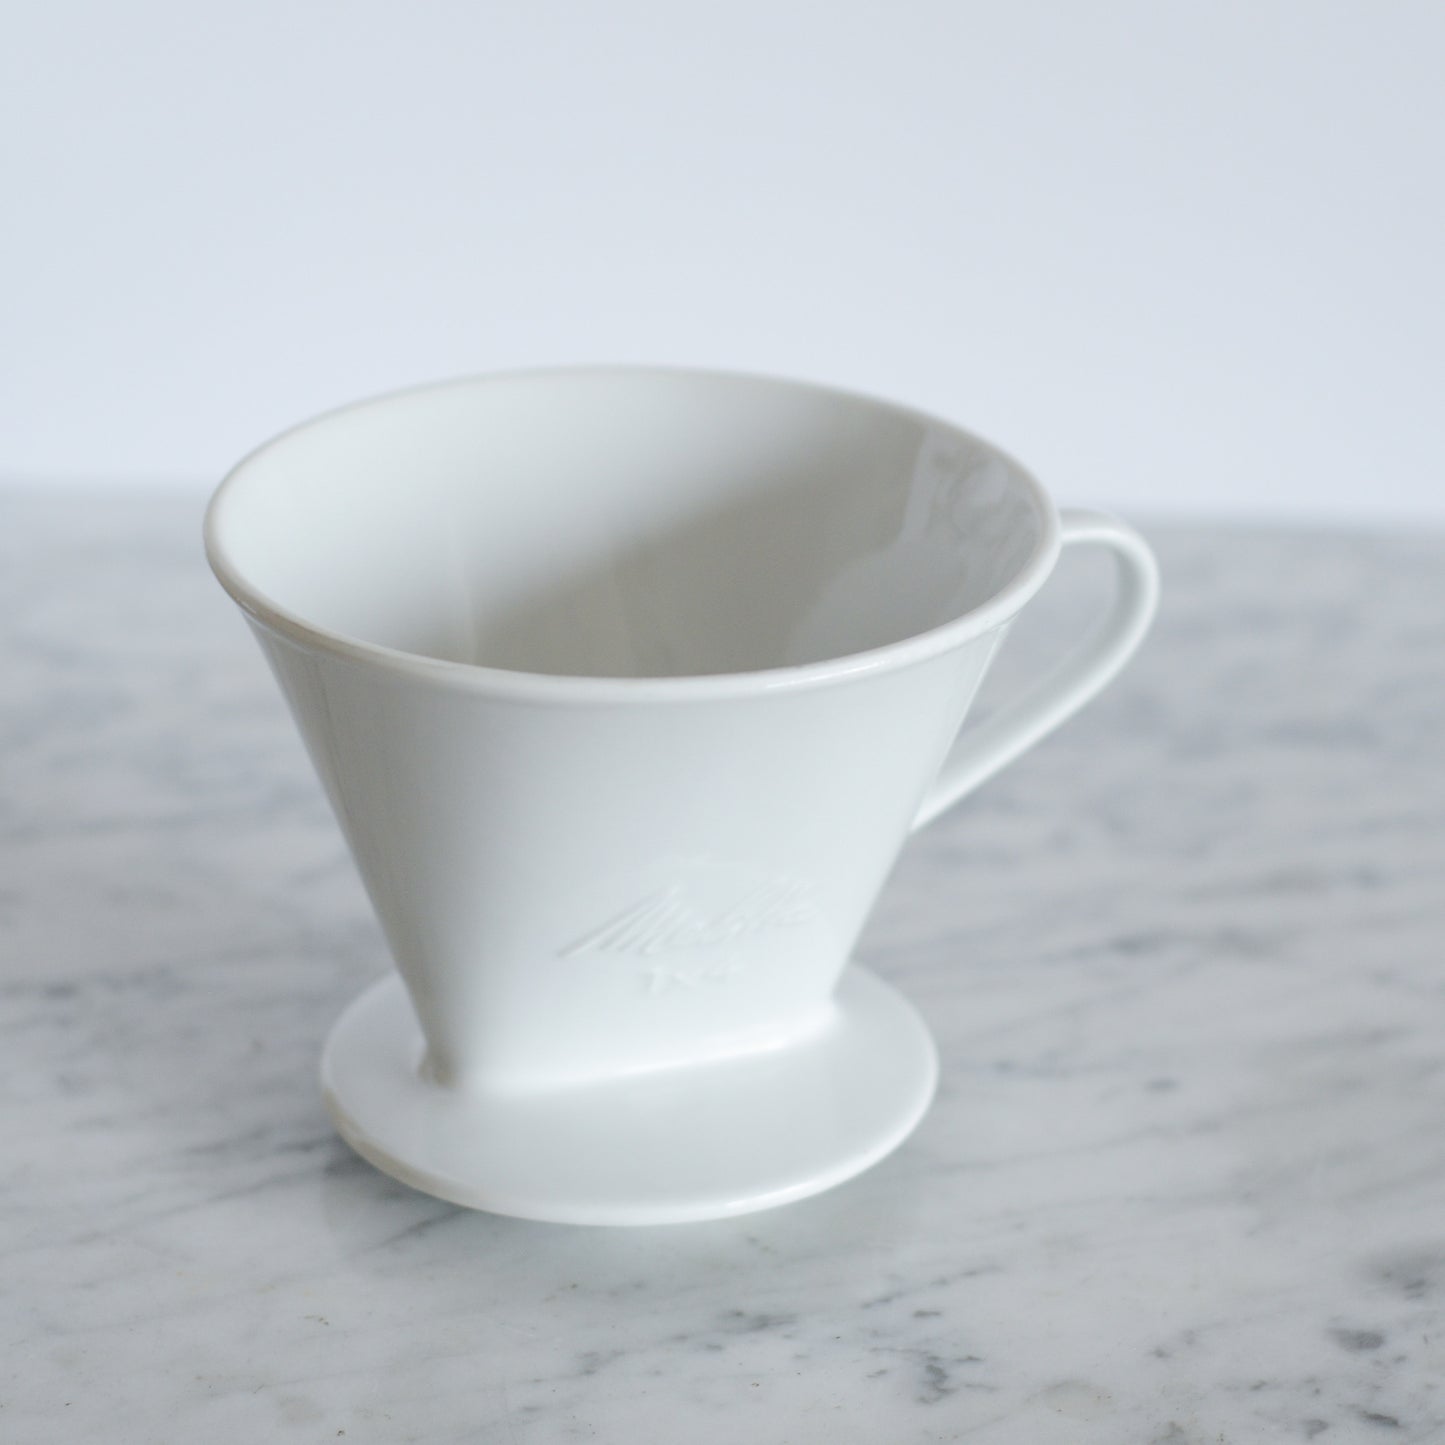 Melitta Porcelain Pour-Over Coffee Filter, 1X4